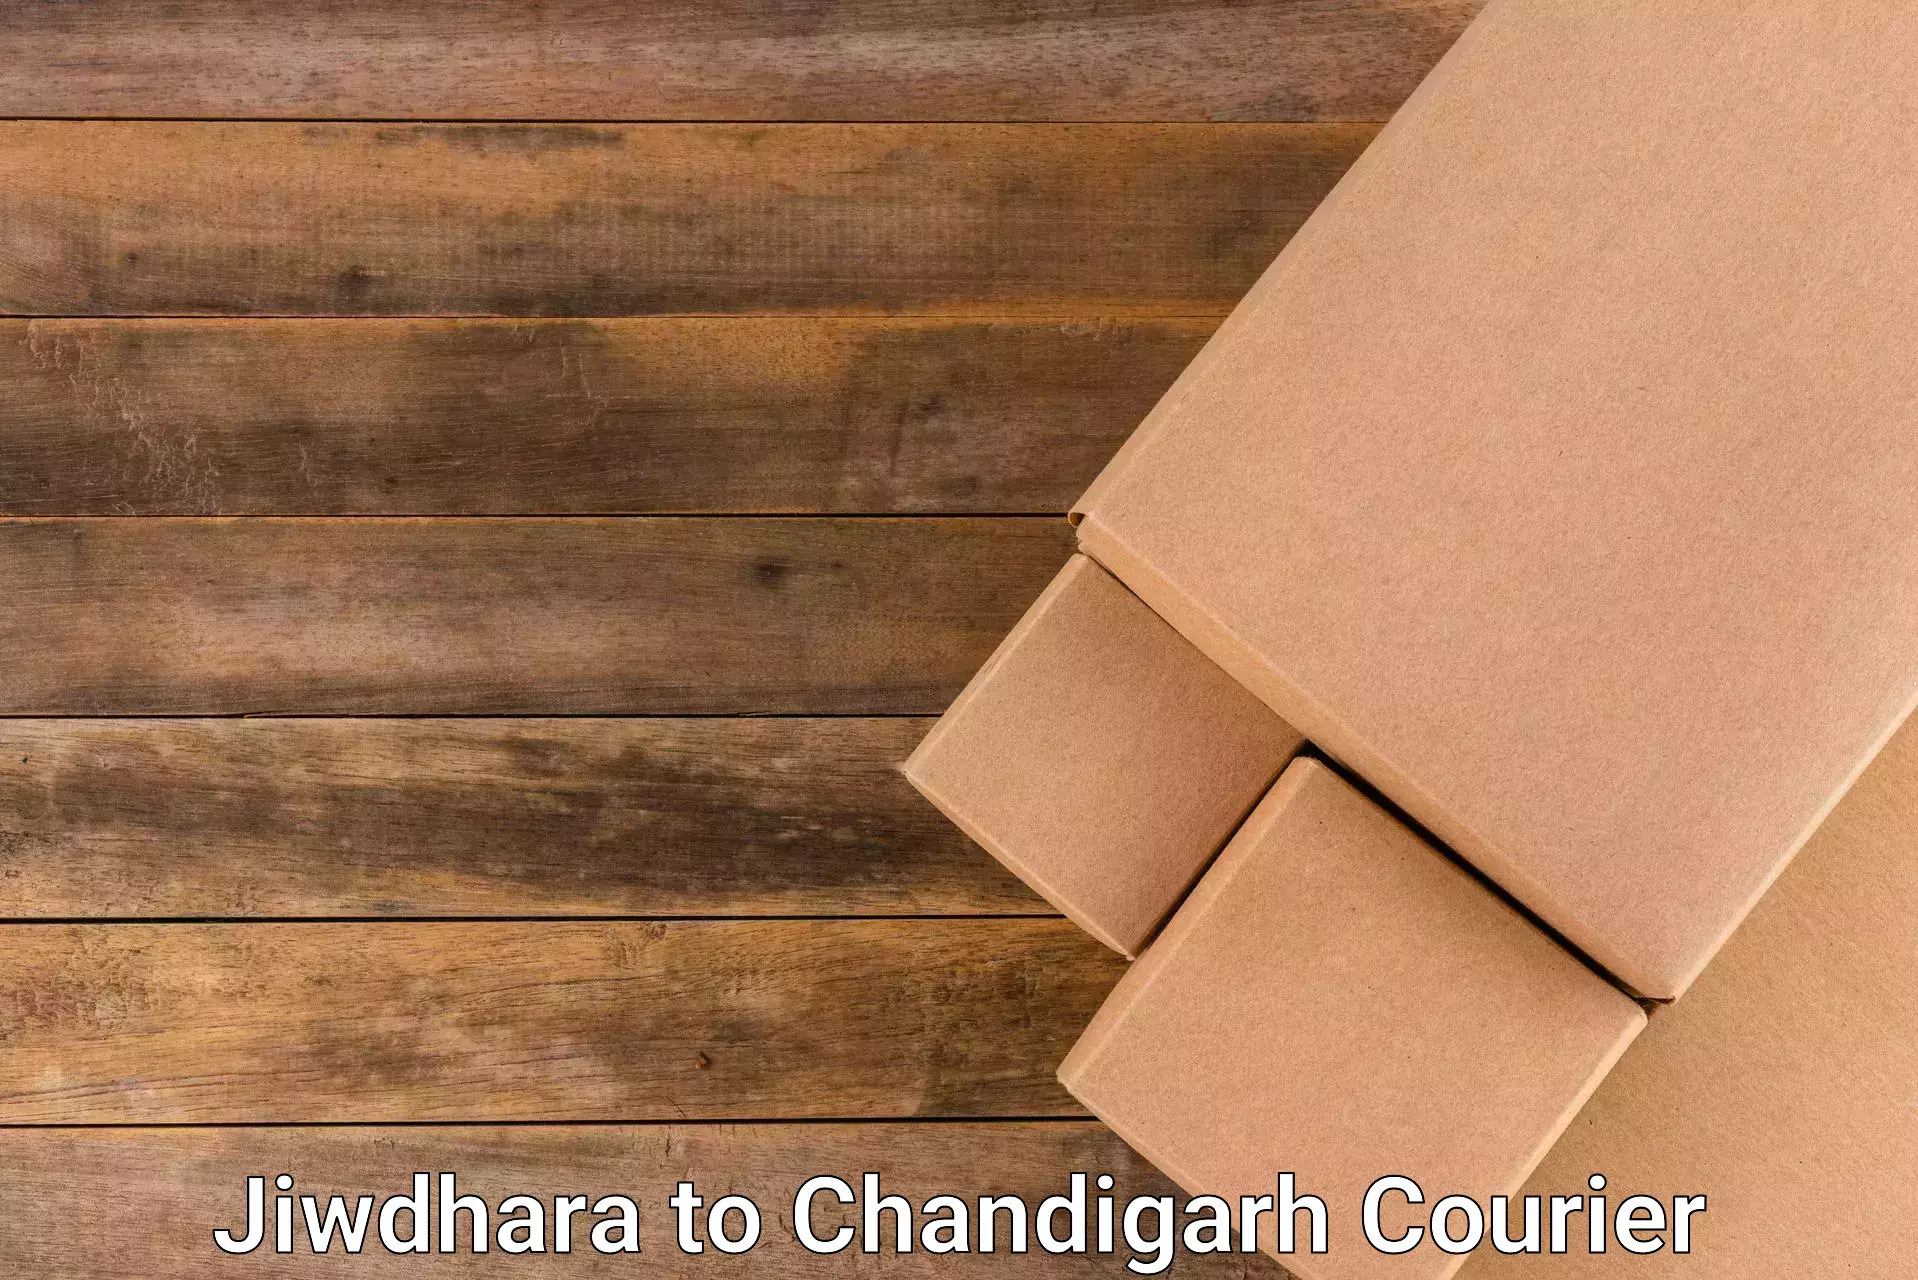 Reliable parcel services in Jiwdhara to Chandigarh